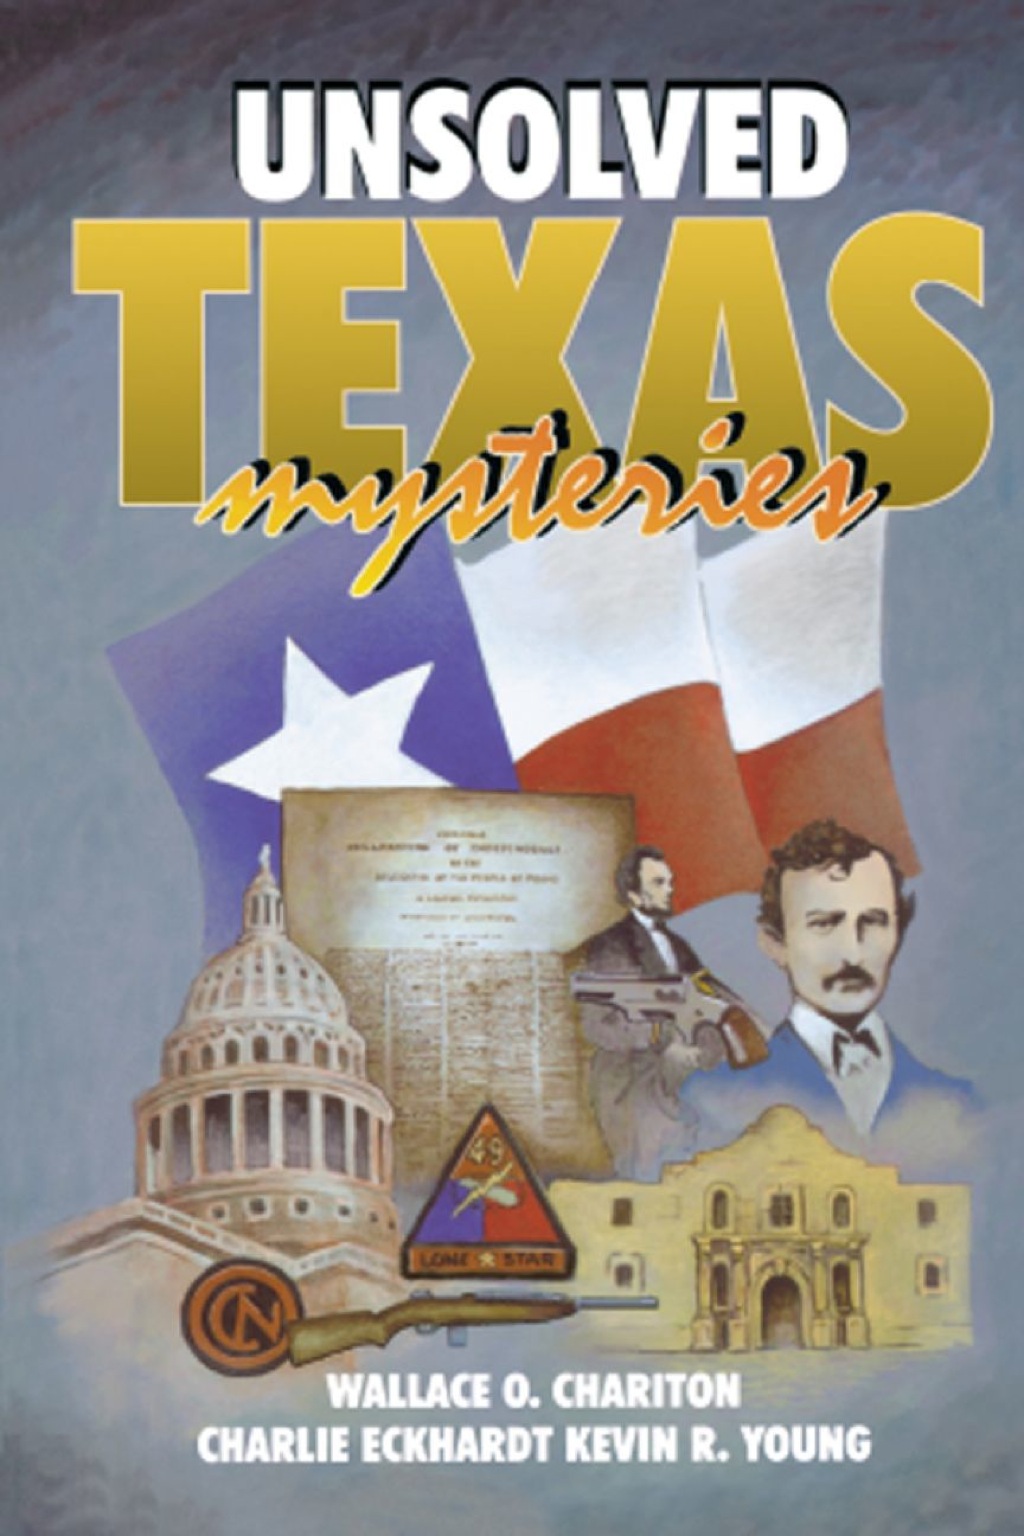 Unsolved Texas Mysteries (eBook) - Wallace O. Chariton; Kevin Young; Charlie Eckhardt,